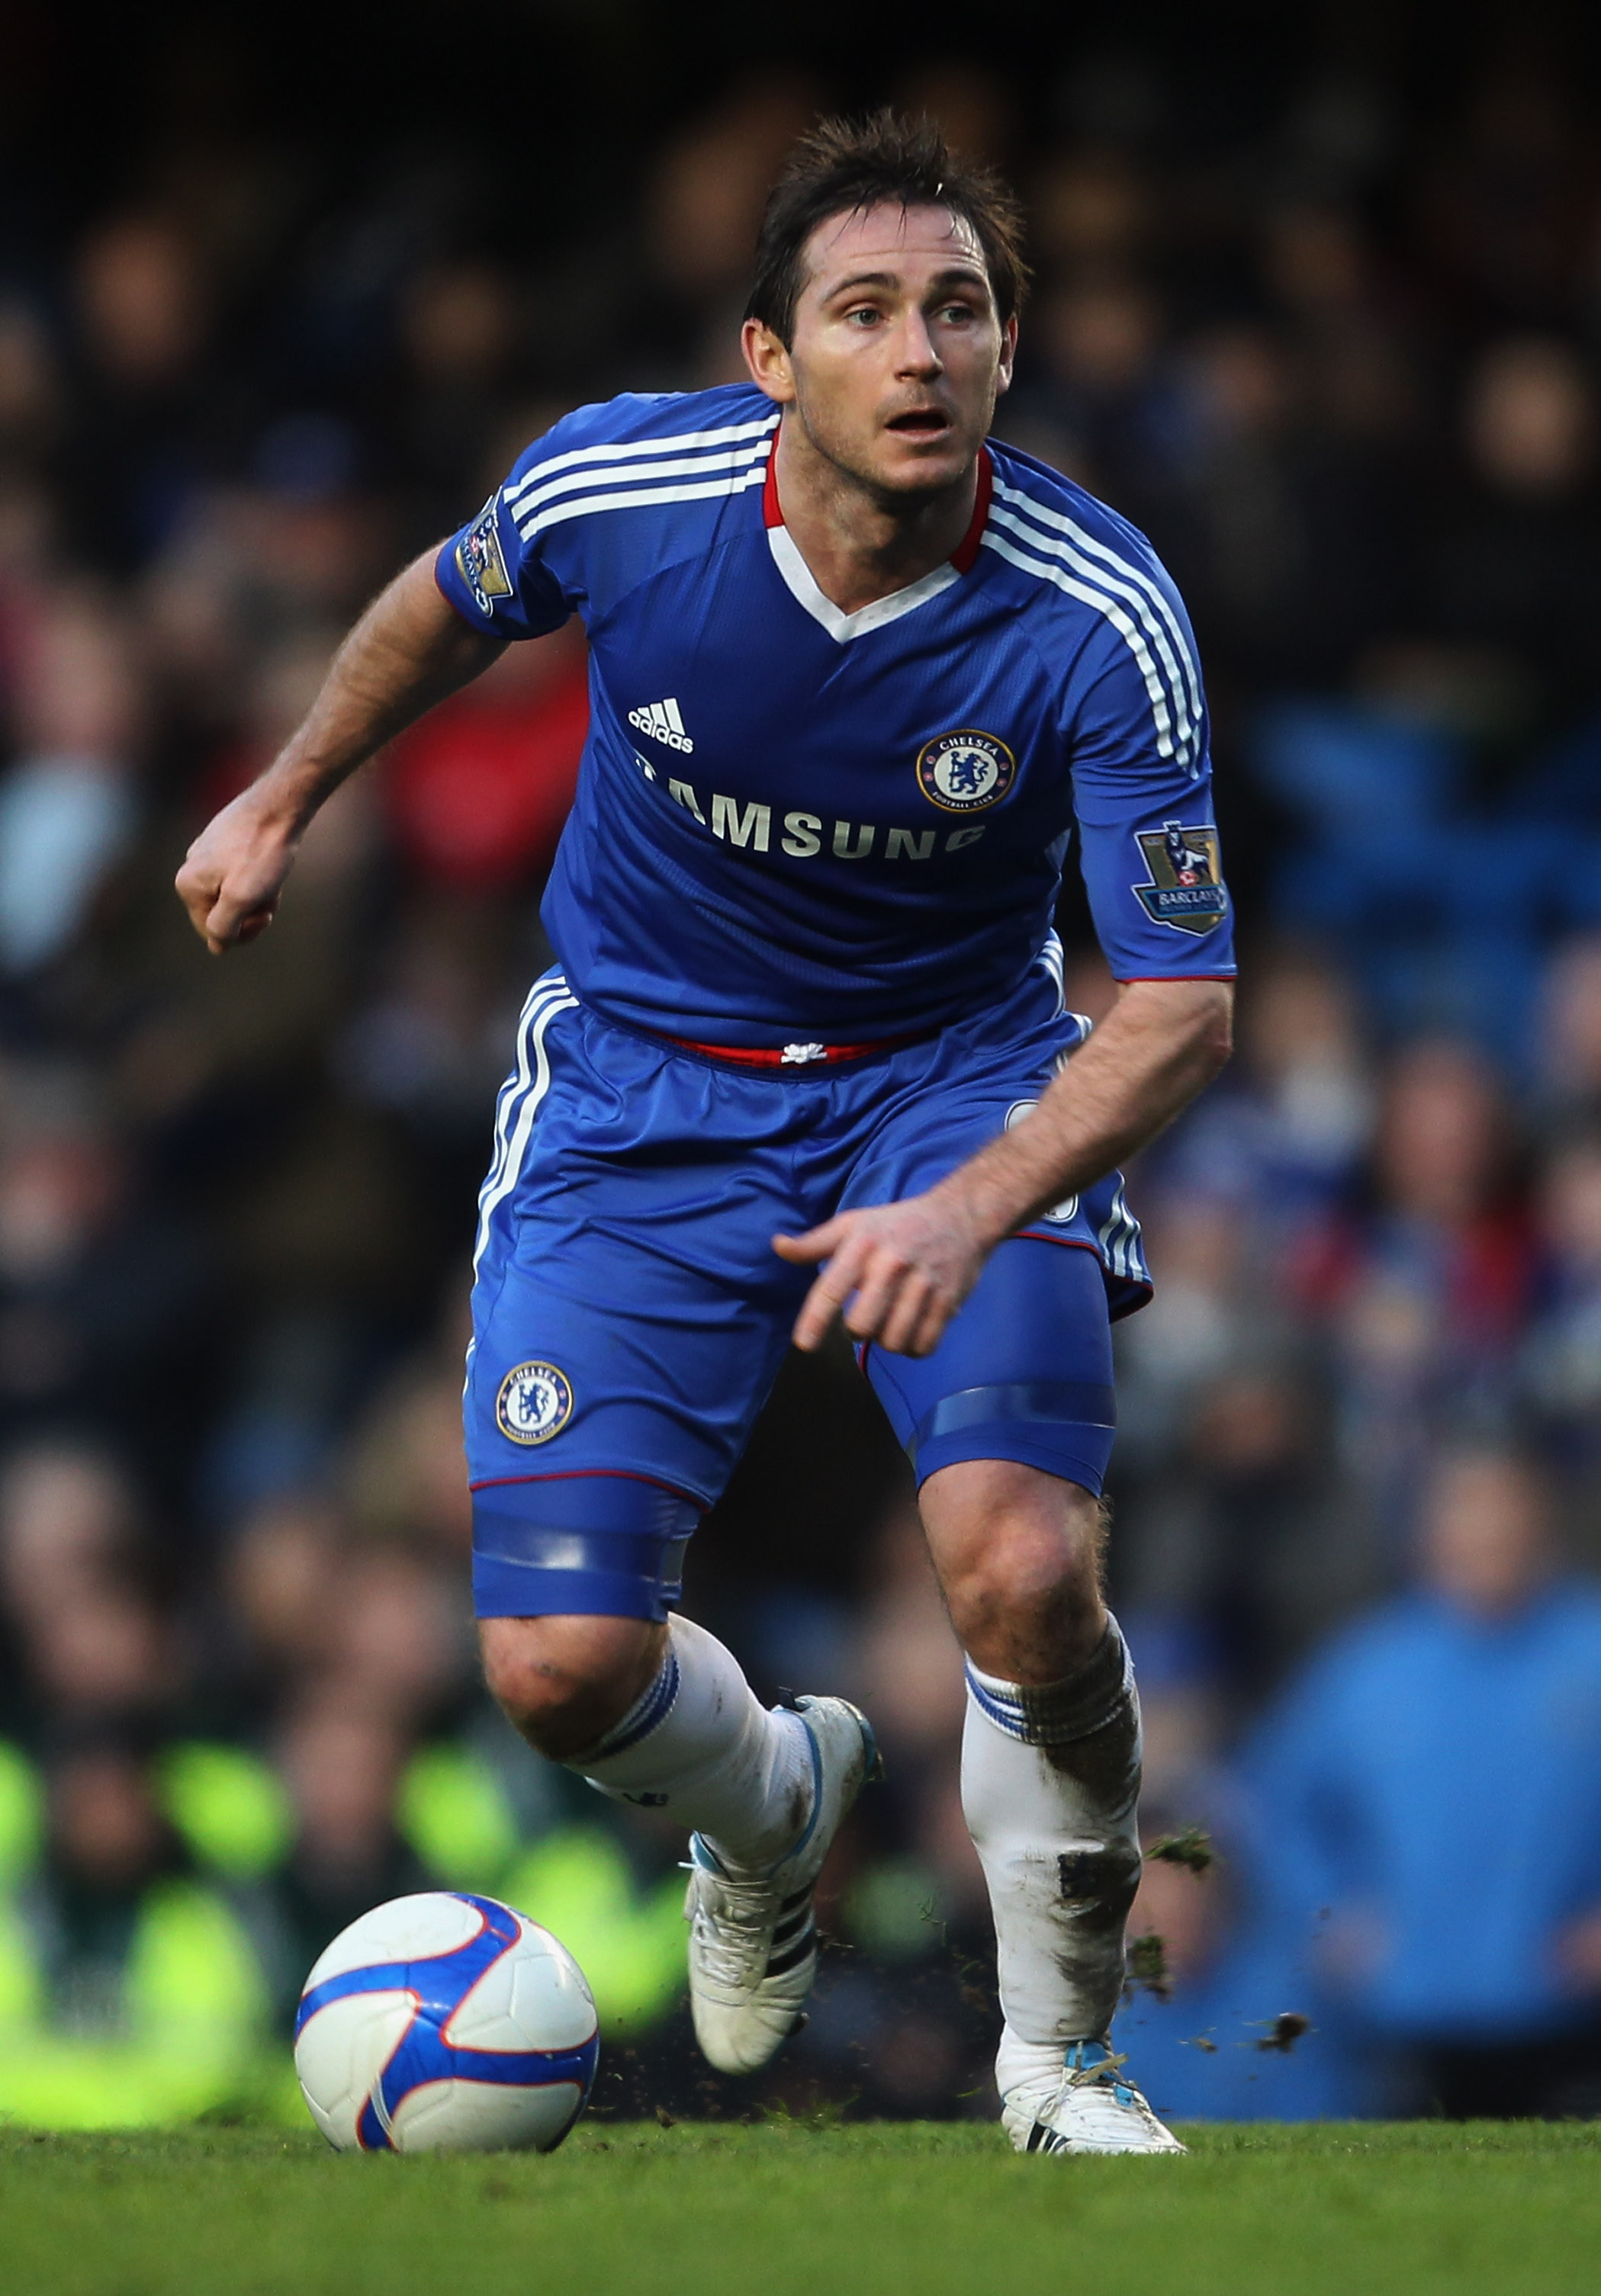 LONDON, ENGLAND - JANUARY 09:  Frank Lampard of Chelsea in action during the FA Cup sponsored by E.ON 3rd round match between Chelsea and Ipswich Town at Stamford Bridge on January 9, 2011 in London, England.  (Photo by Scott Heavey/Getty Images)